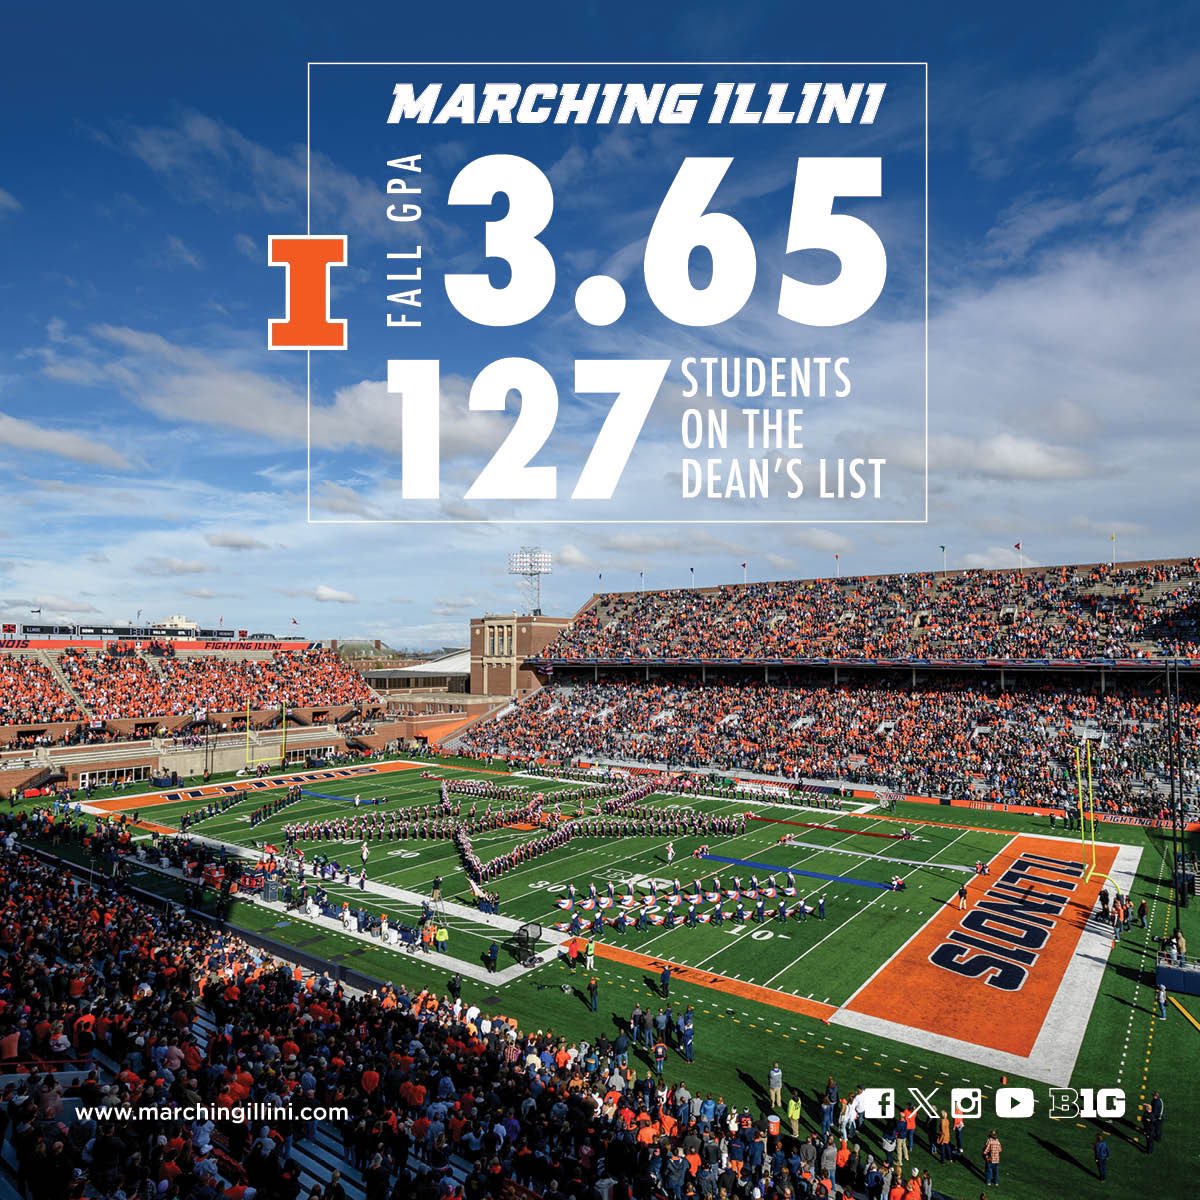 🎺📚Move over, Einstein! With an average GPA of 3.65 and 127 members on the Dean’s List, they’re basically the Einsteins of halftime shows! Who knew you could march to the beat of straight A’s? Keep hitting those notes & grades, Marching Illini! #brainsandband #illini 🔶🔷💯